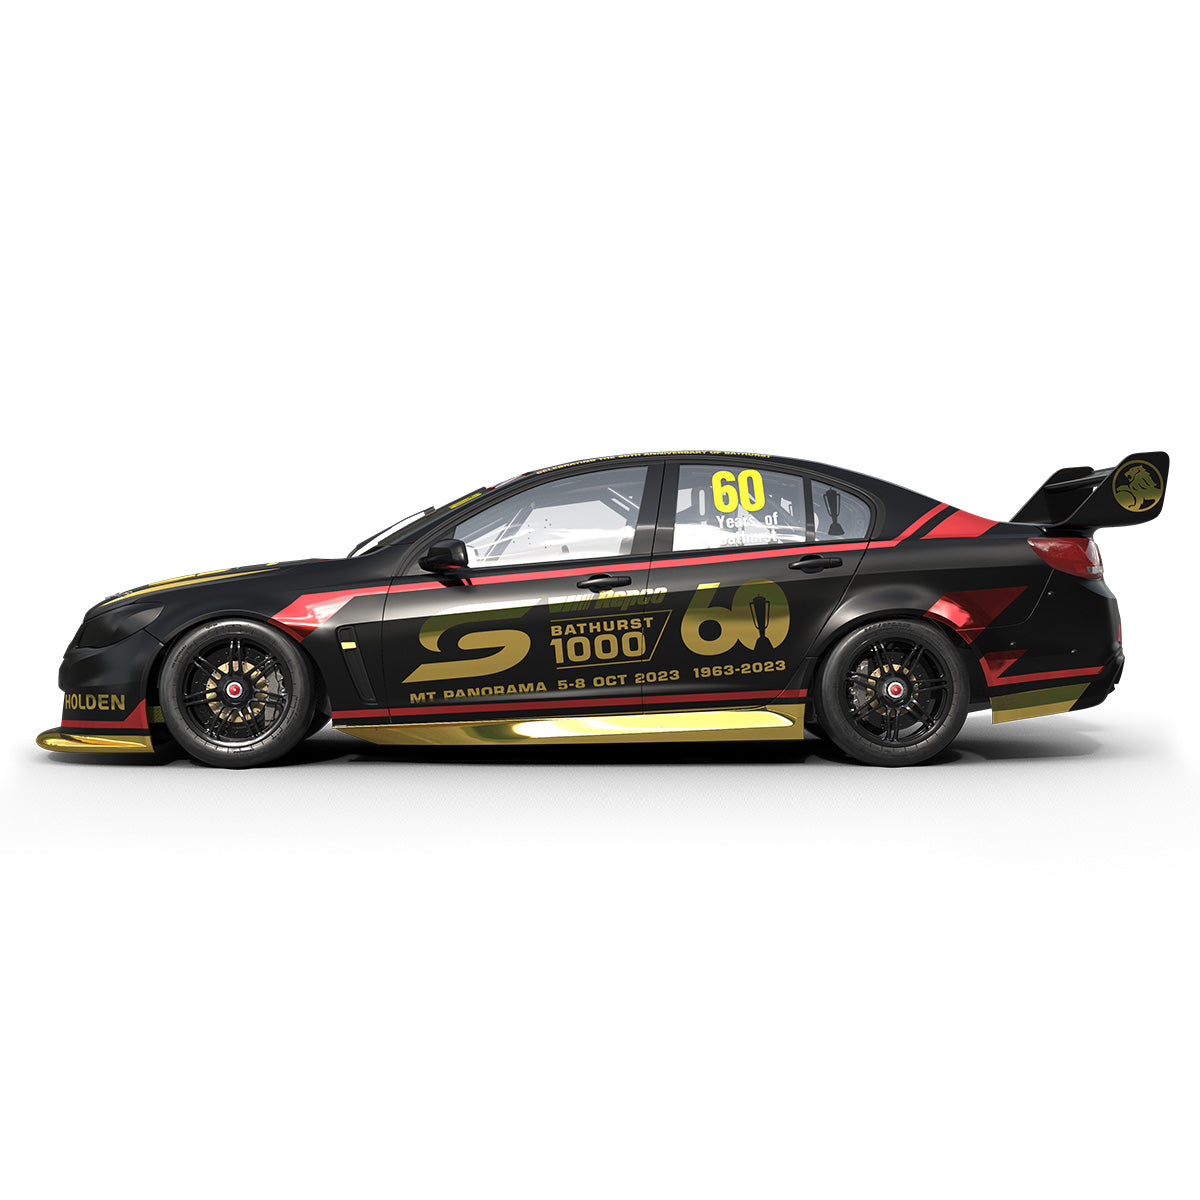 Holden Commodore VF V8 Supercar - 60th Anniversary Of The Great Race - Special Limited Edition